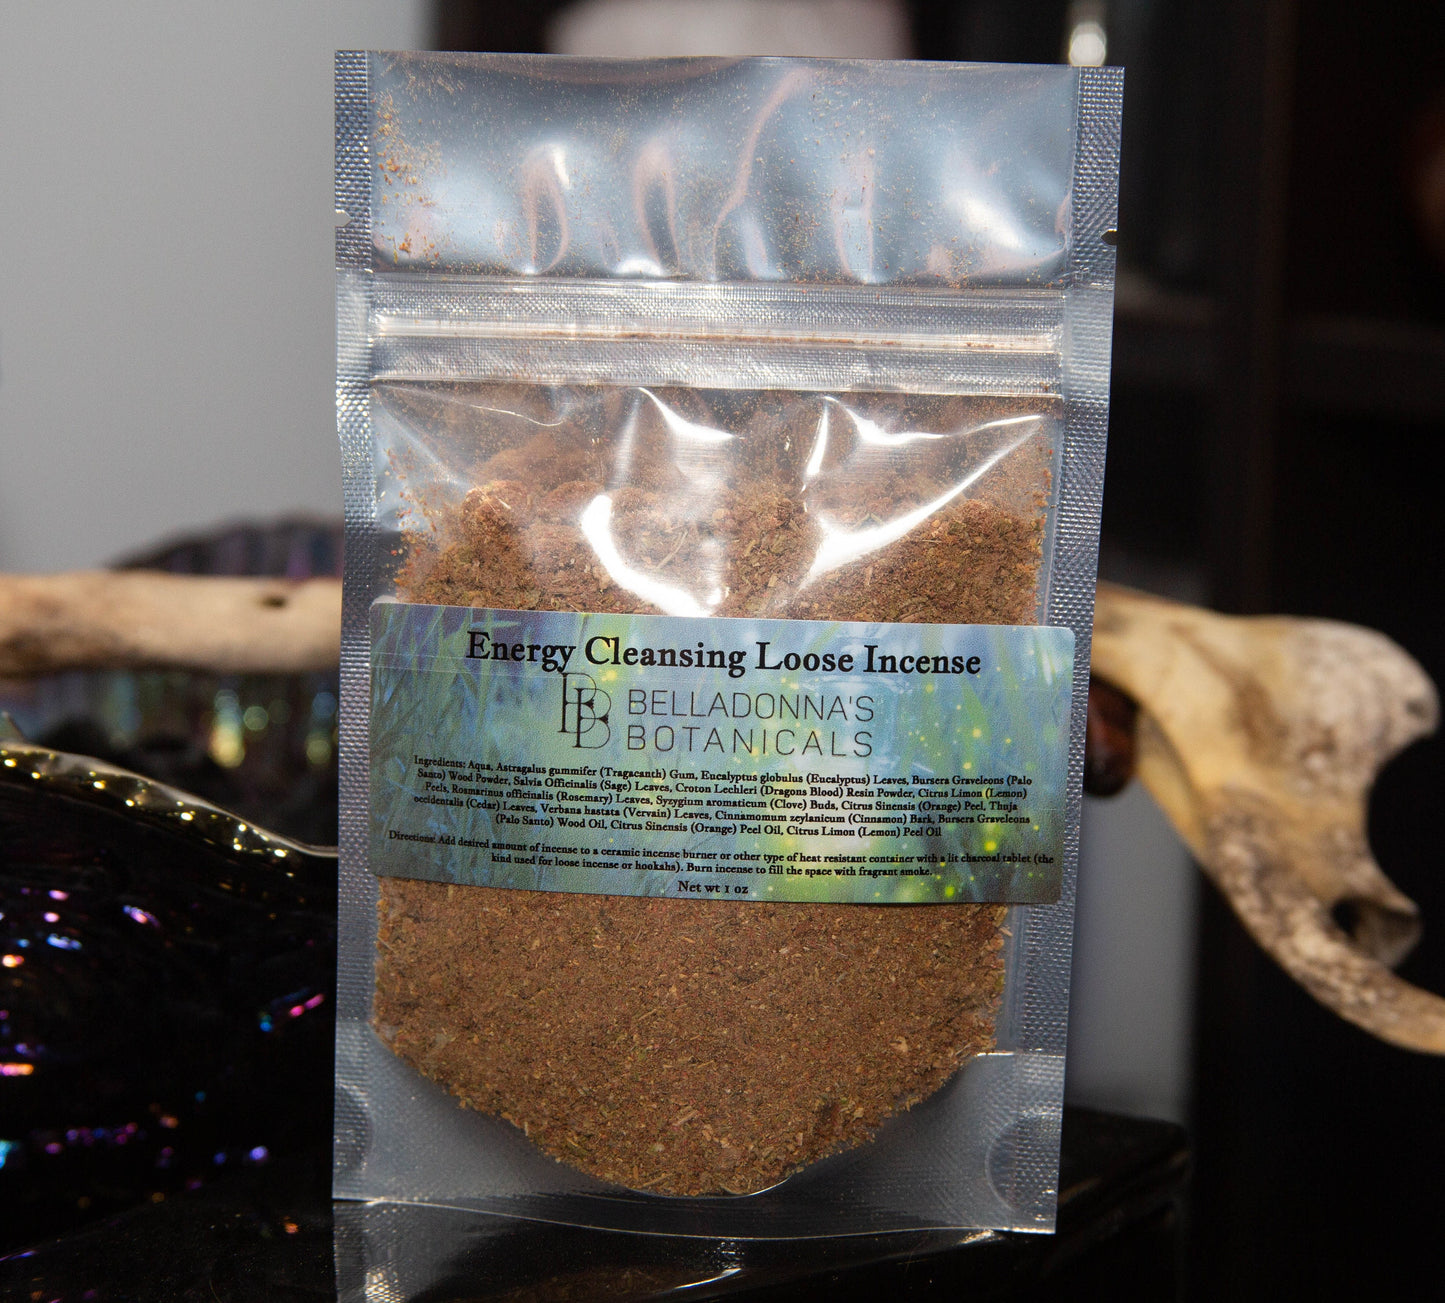 Energy Cleansing Loose Incense